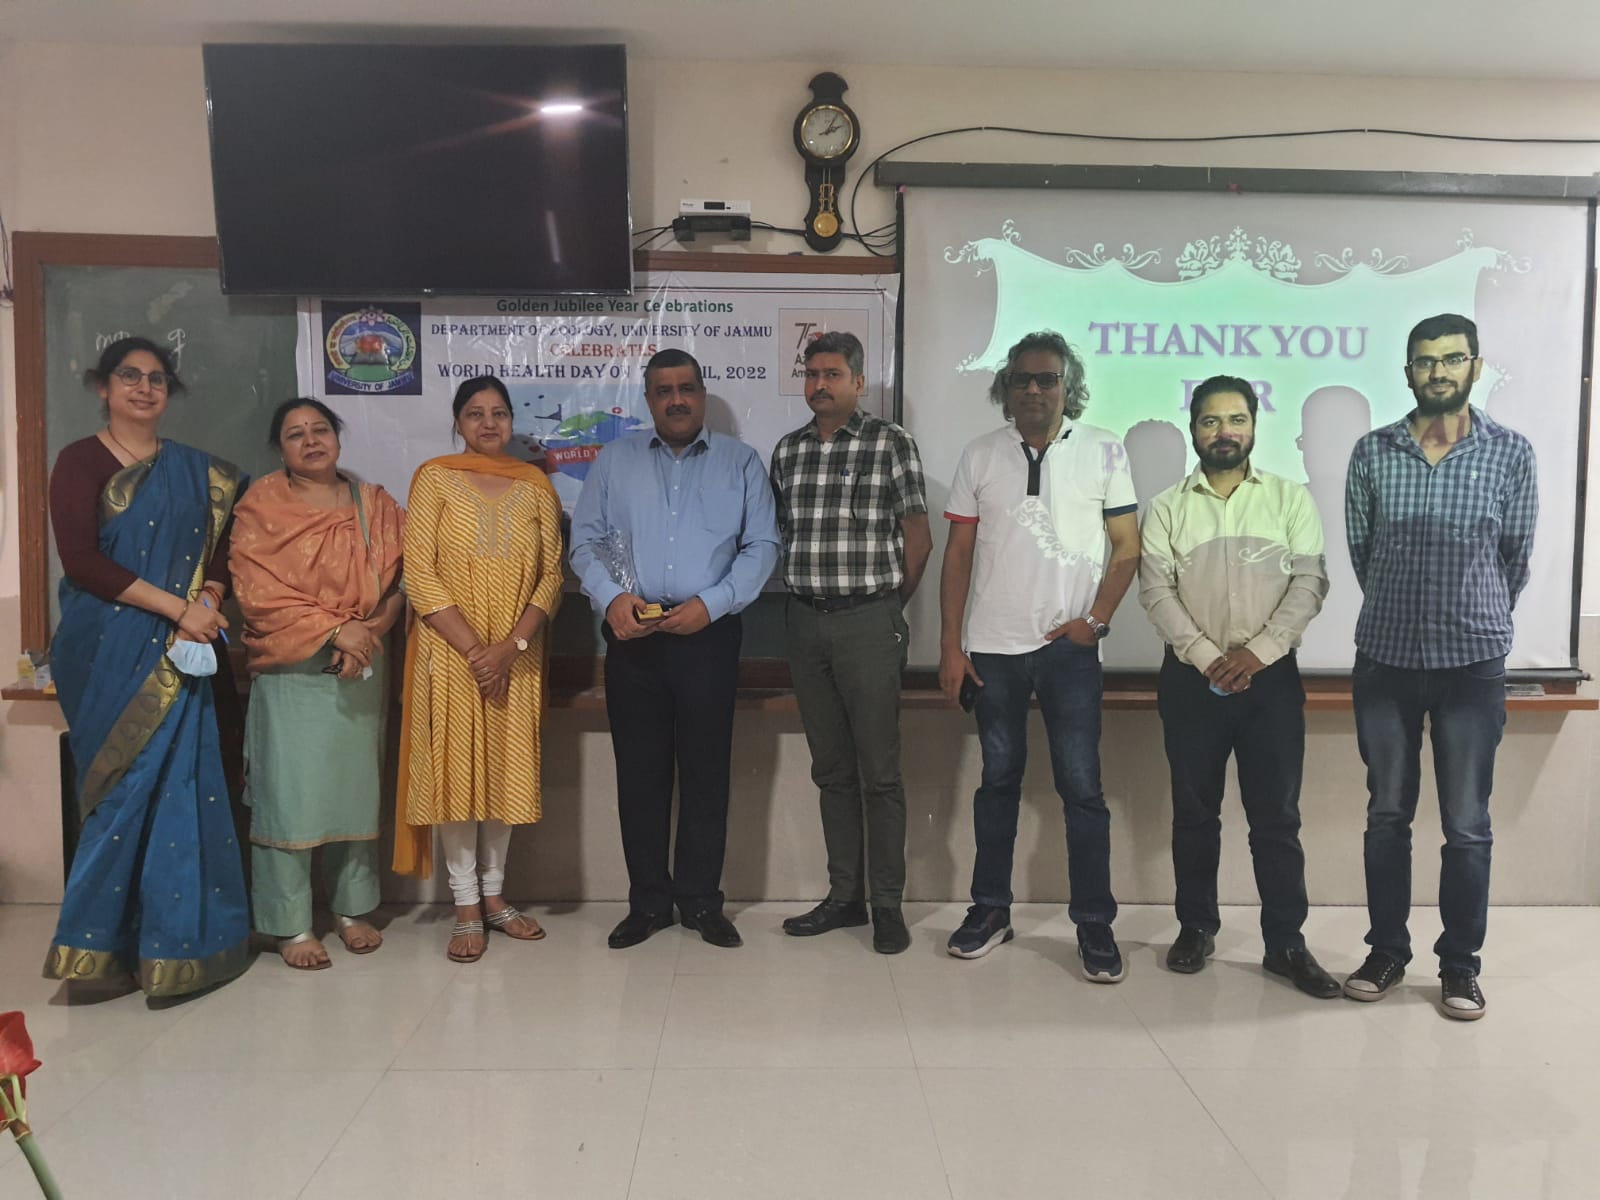 “World Health Day” was celebrated on 7th April 2022 by the Department of Zoology, University of Jammu